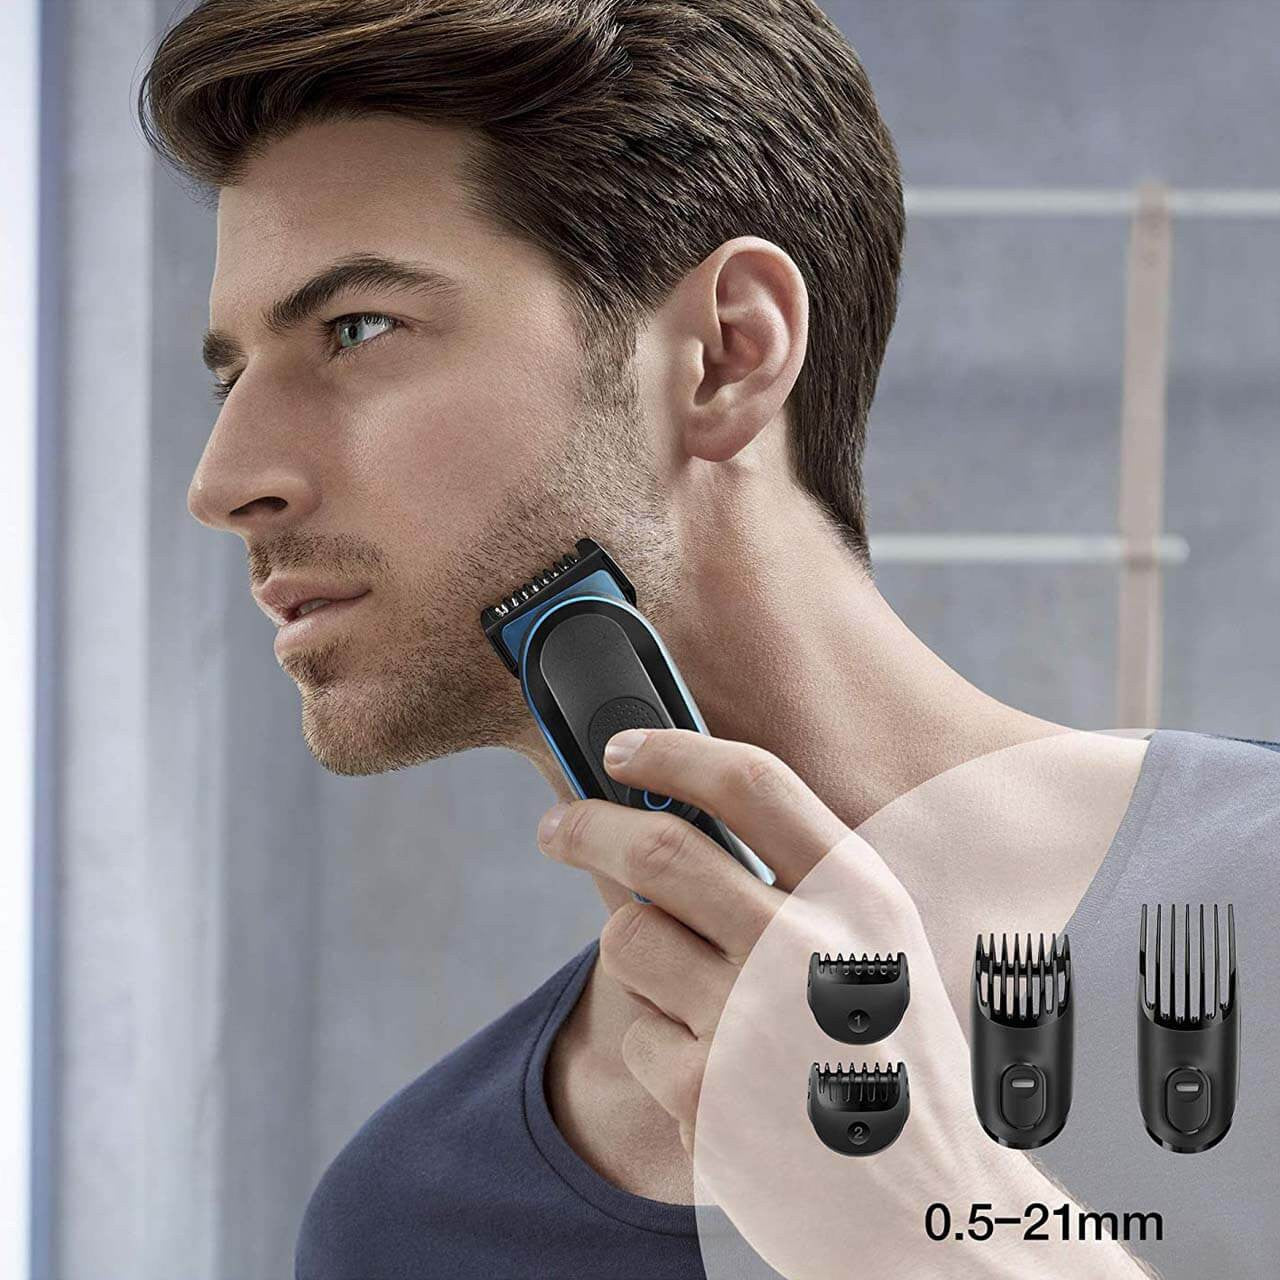 Braun All-in-one trimmer 3 for Face, Hair, and Body, Black/Blue 9-in-1 styling kit with Gillette Fusion5 ProGlide razor